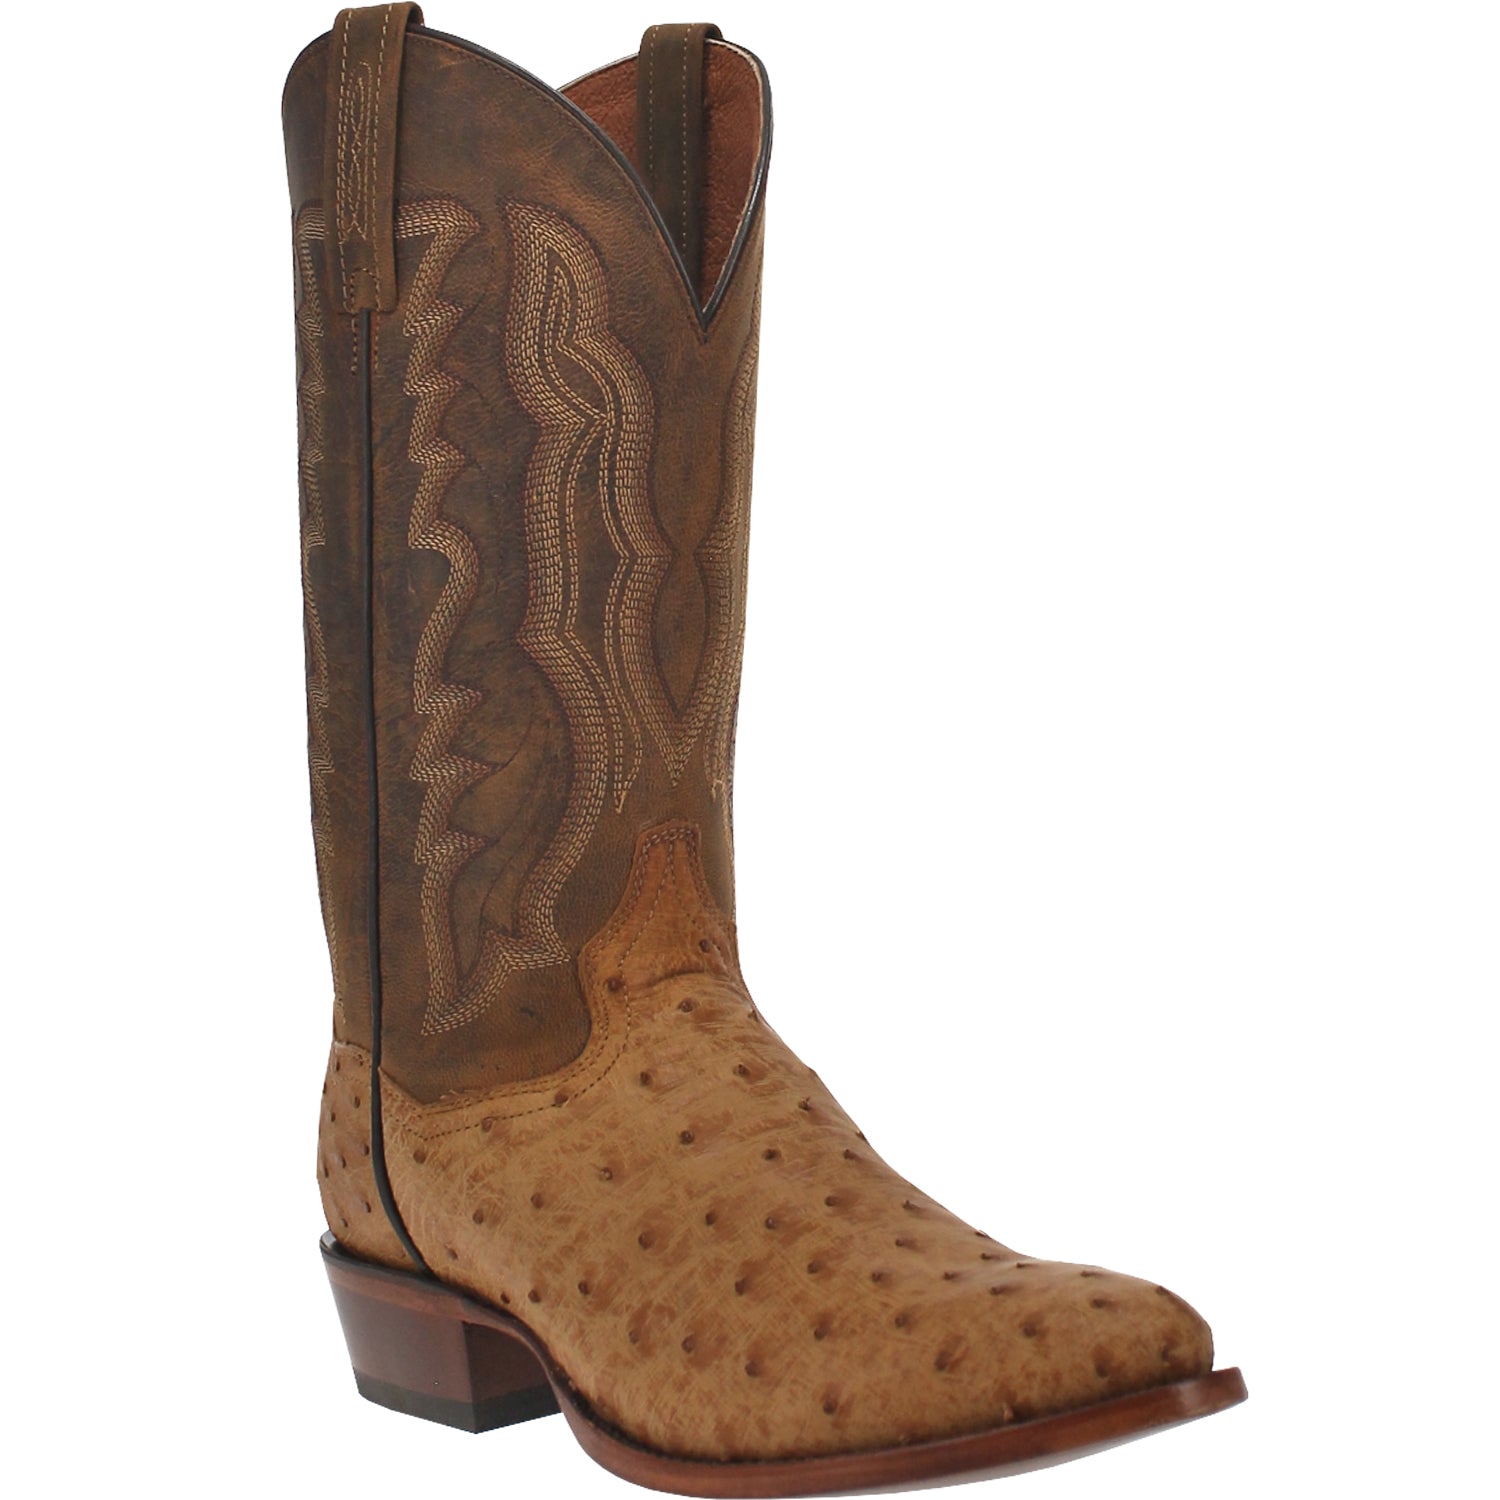 GEHRIG FULL QUILL OSTRICH BOOT Cover